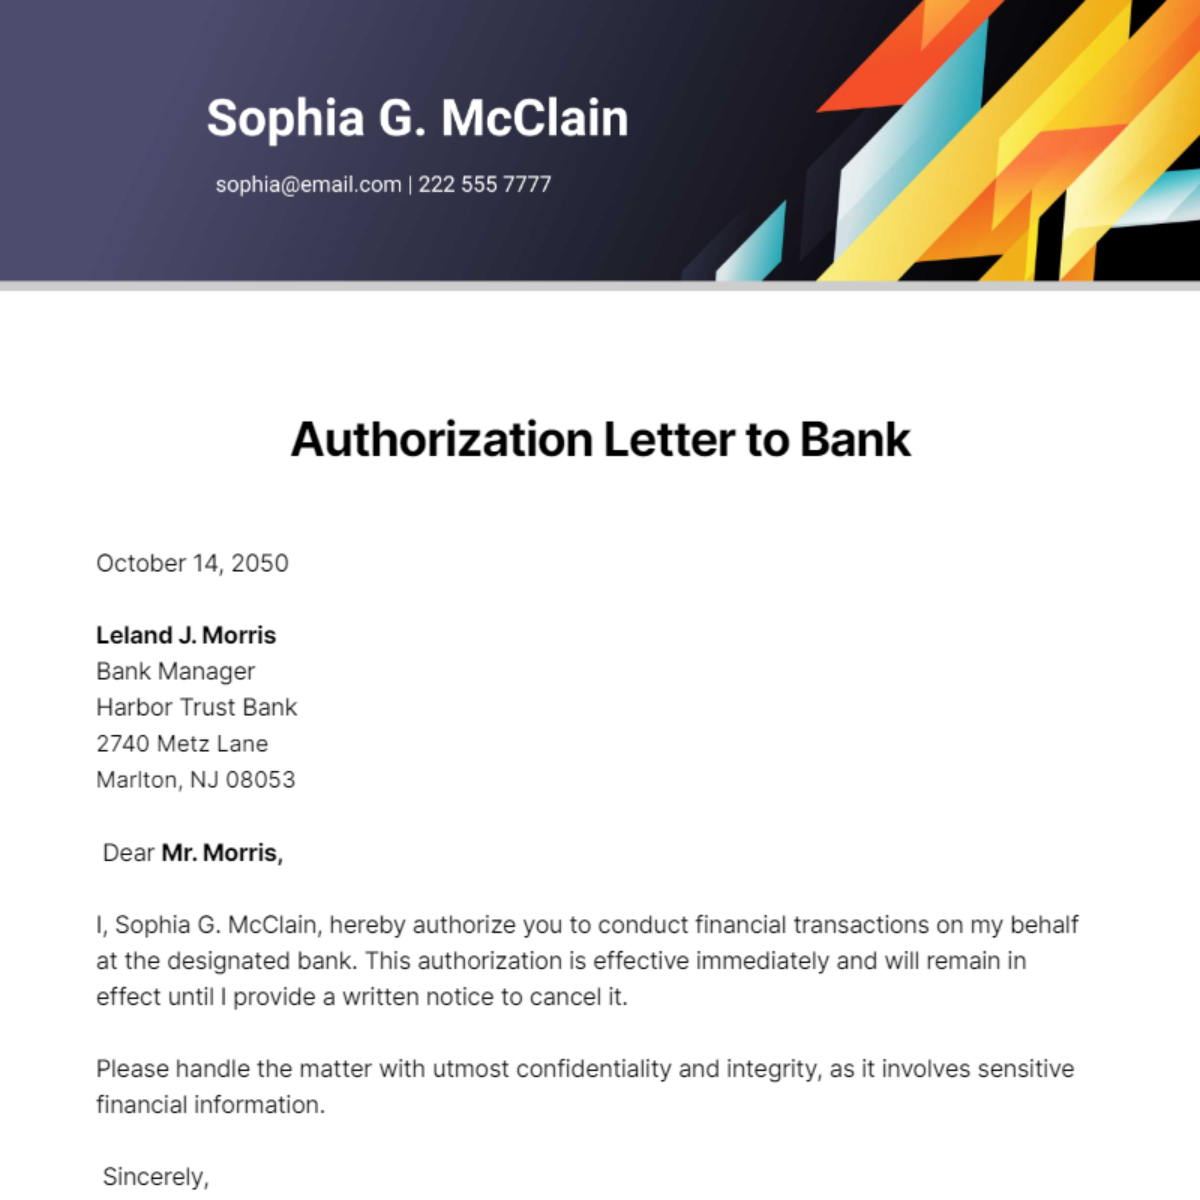 Authorization Letter to Bank Template